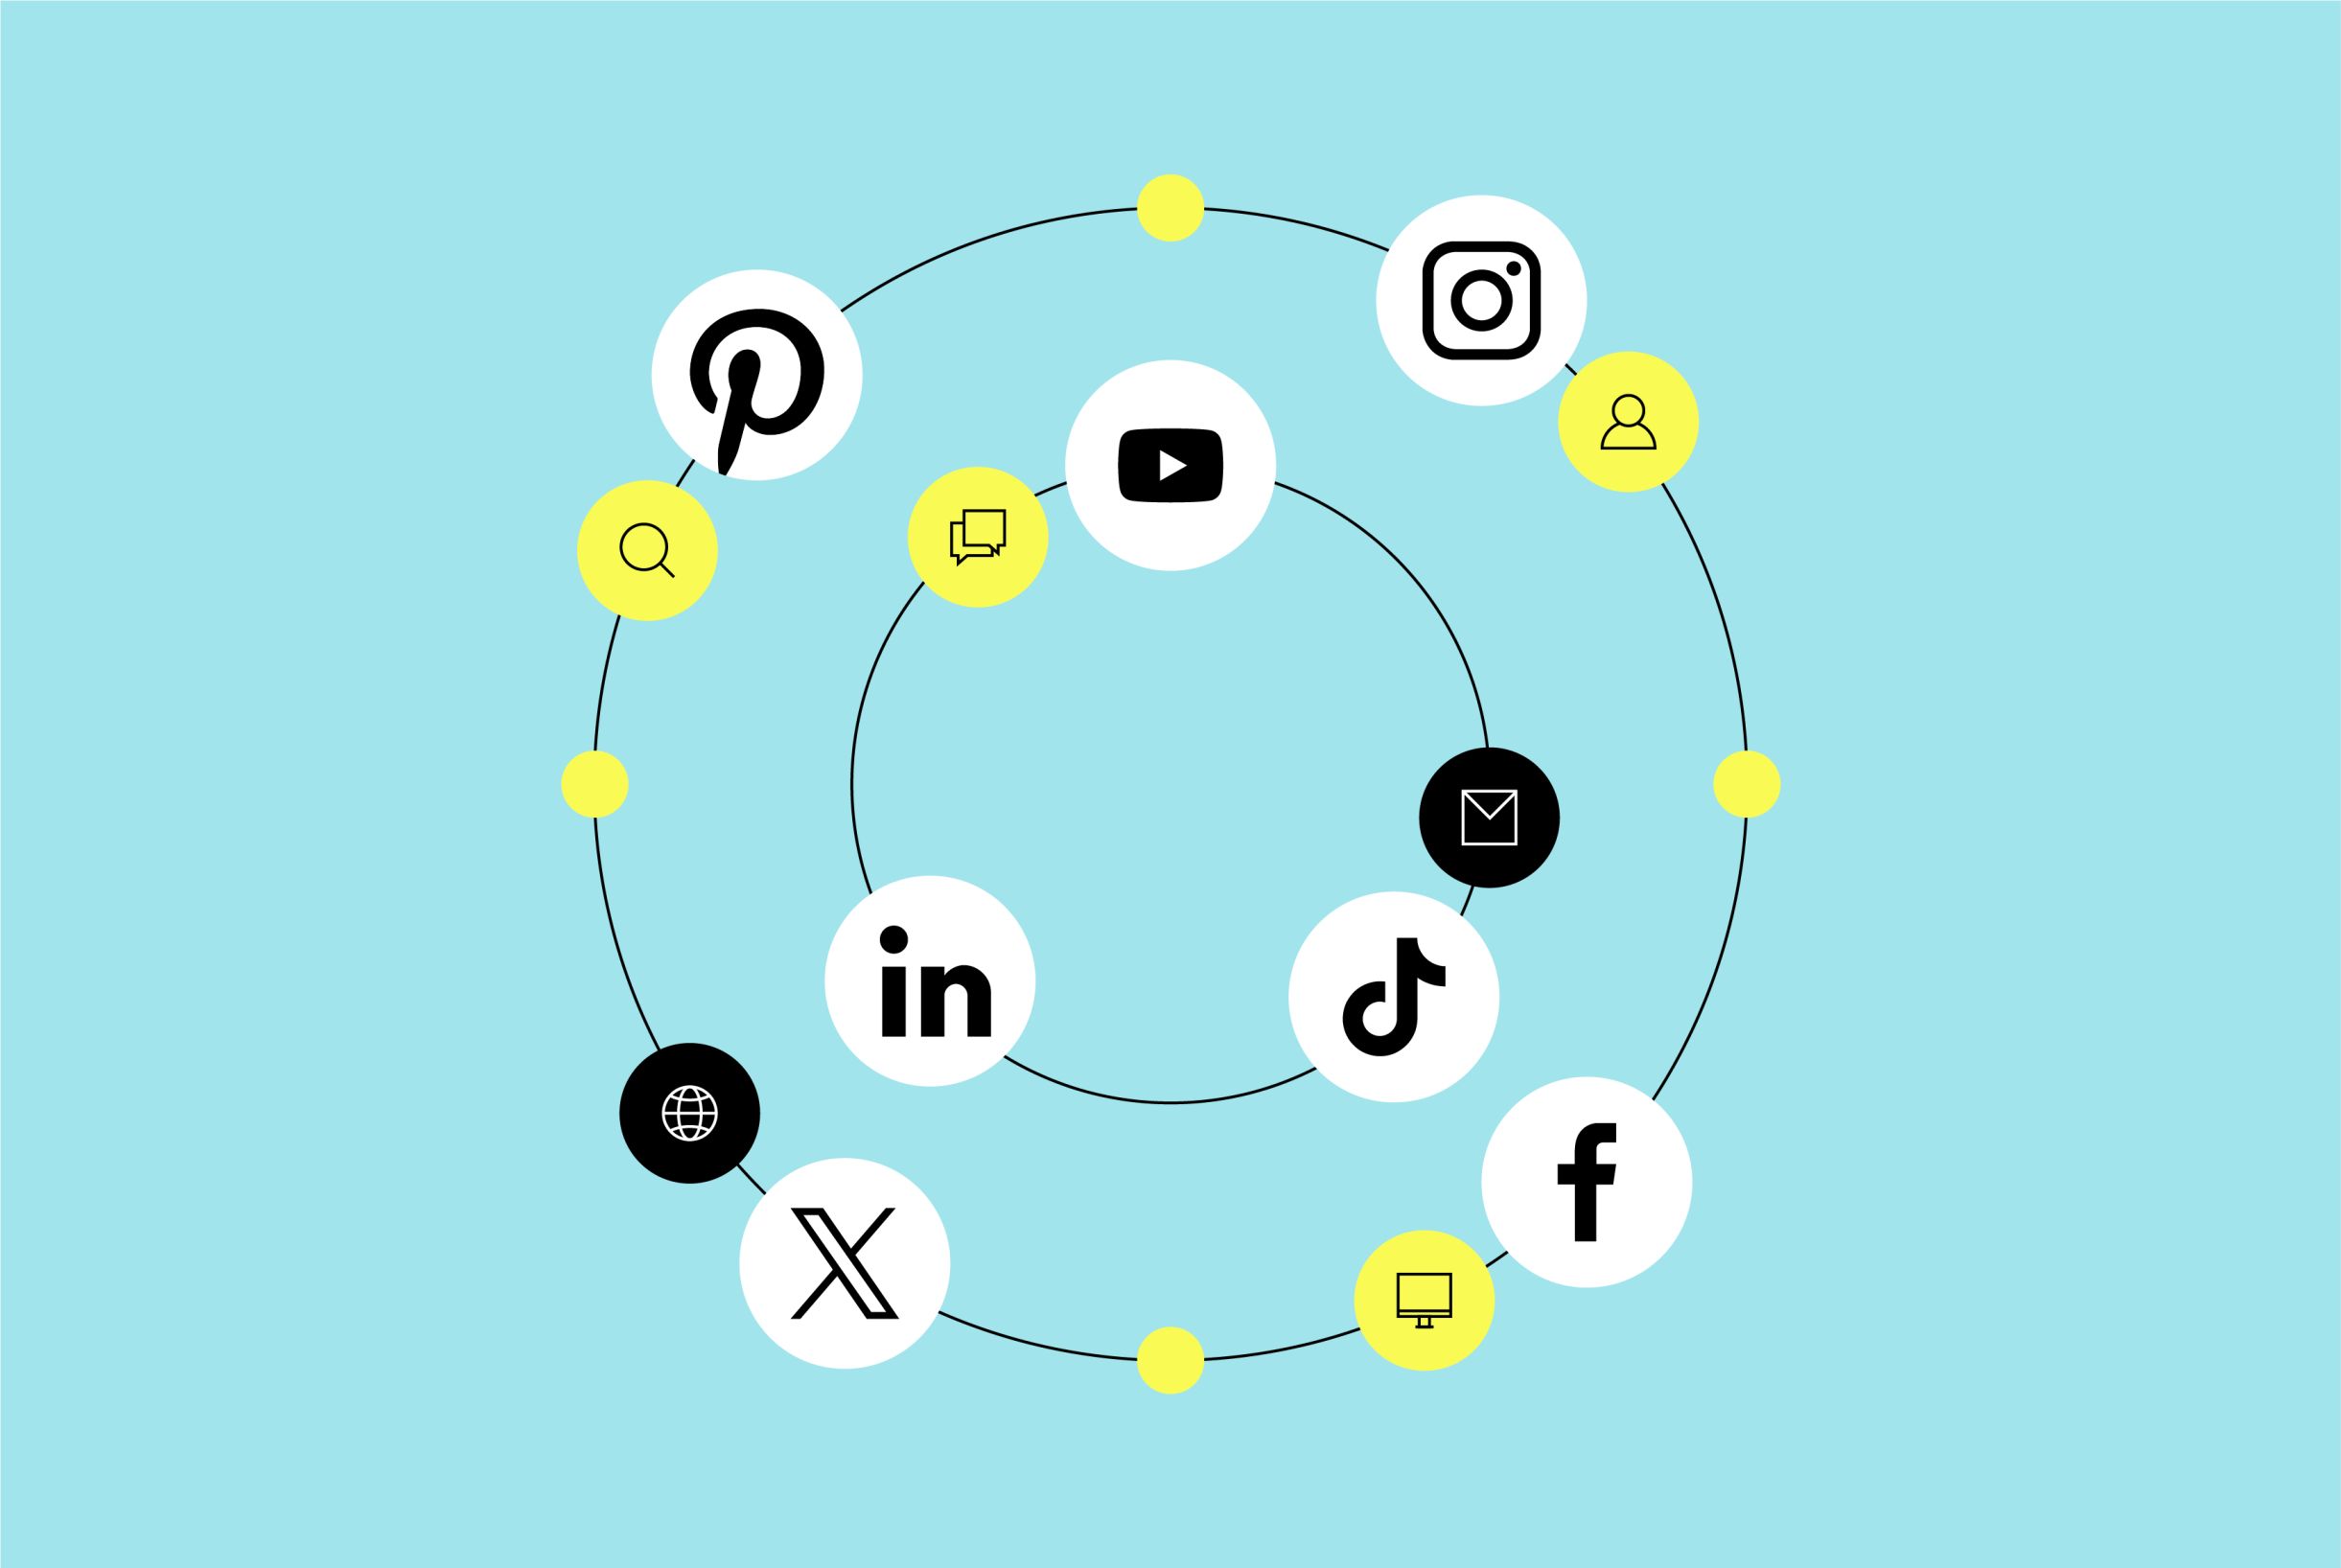 Marketing icons in a circle on a blue background.